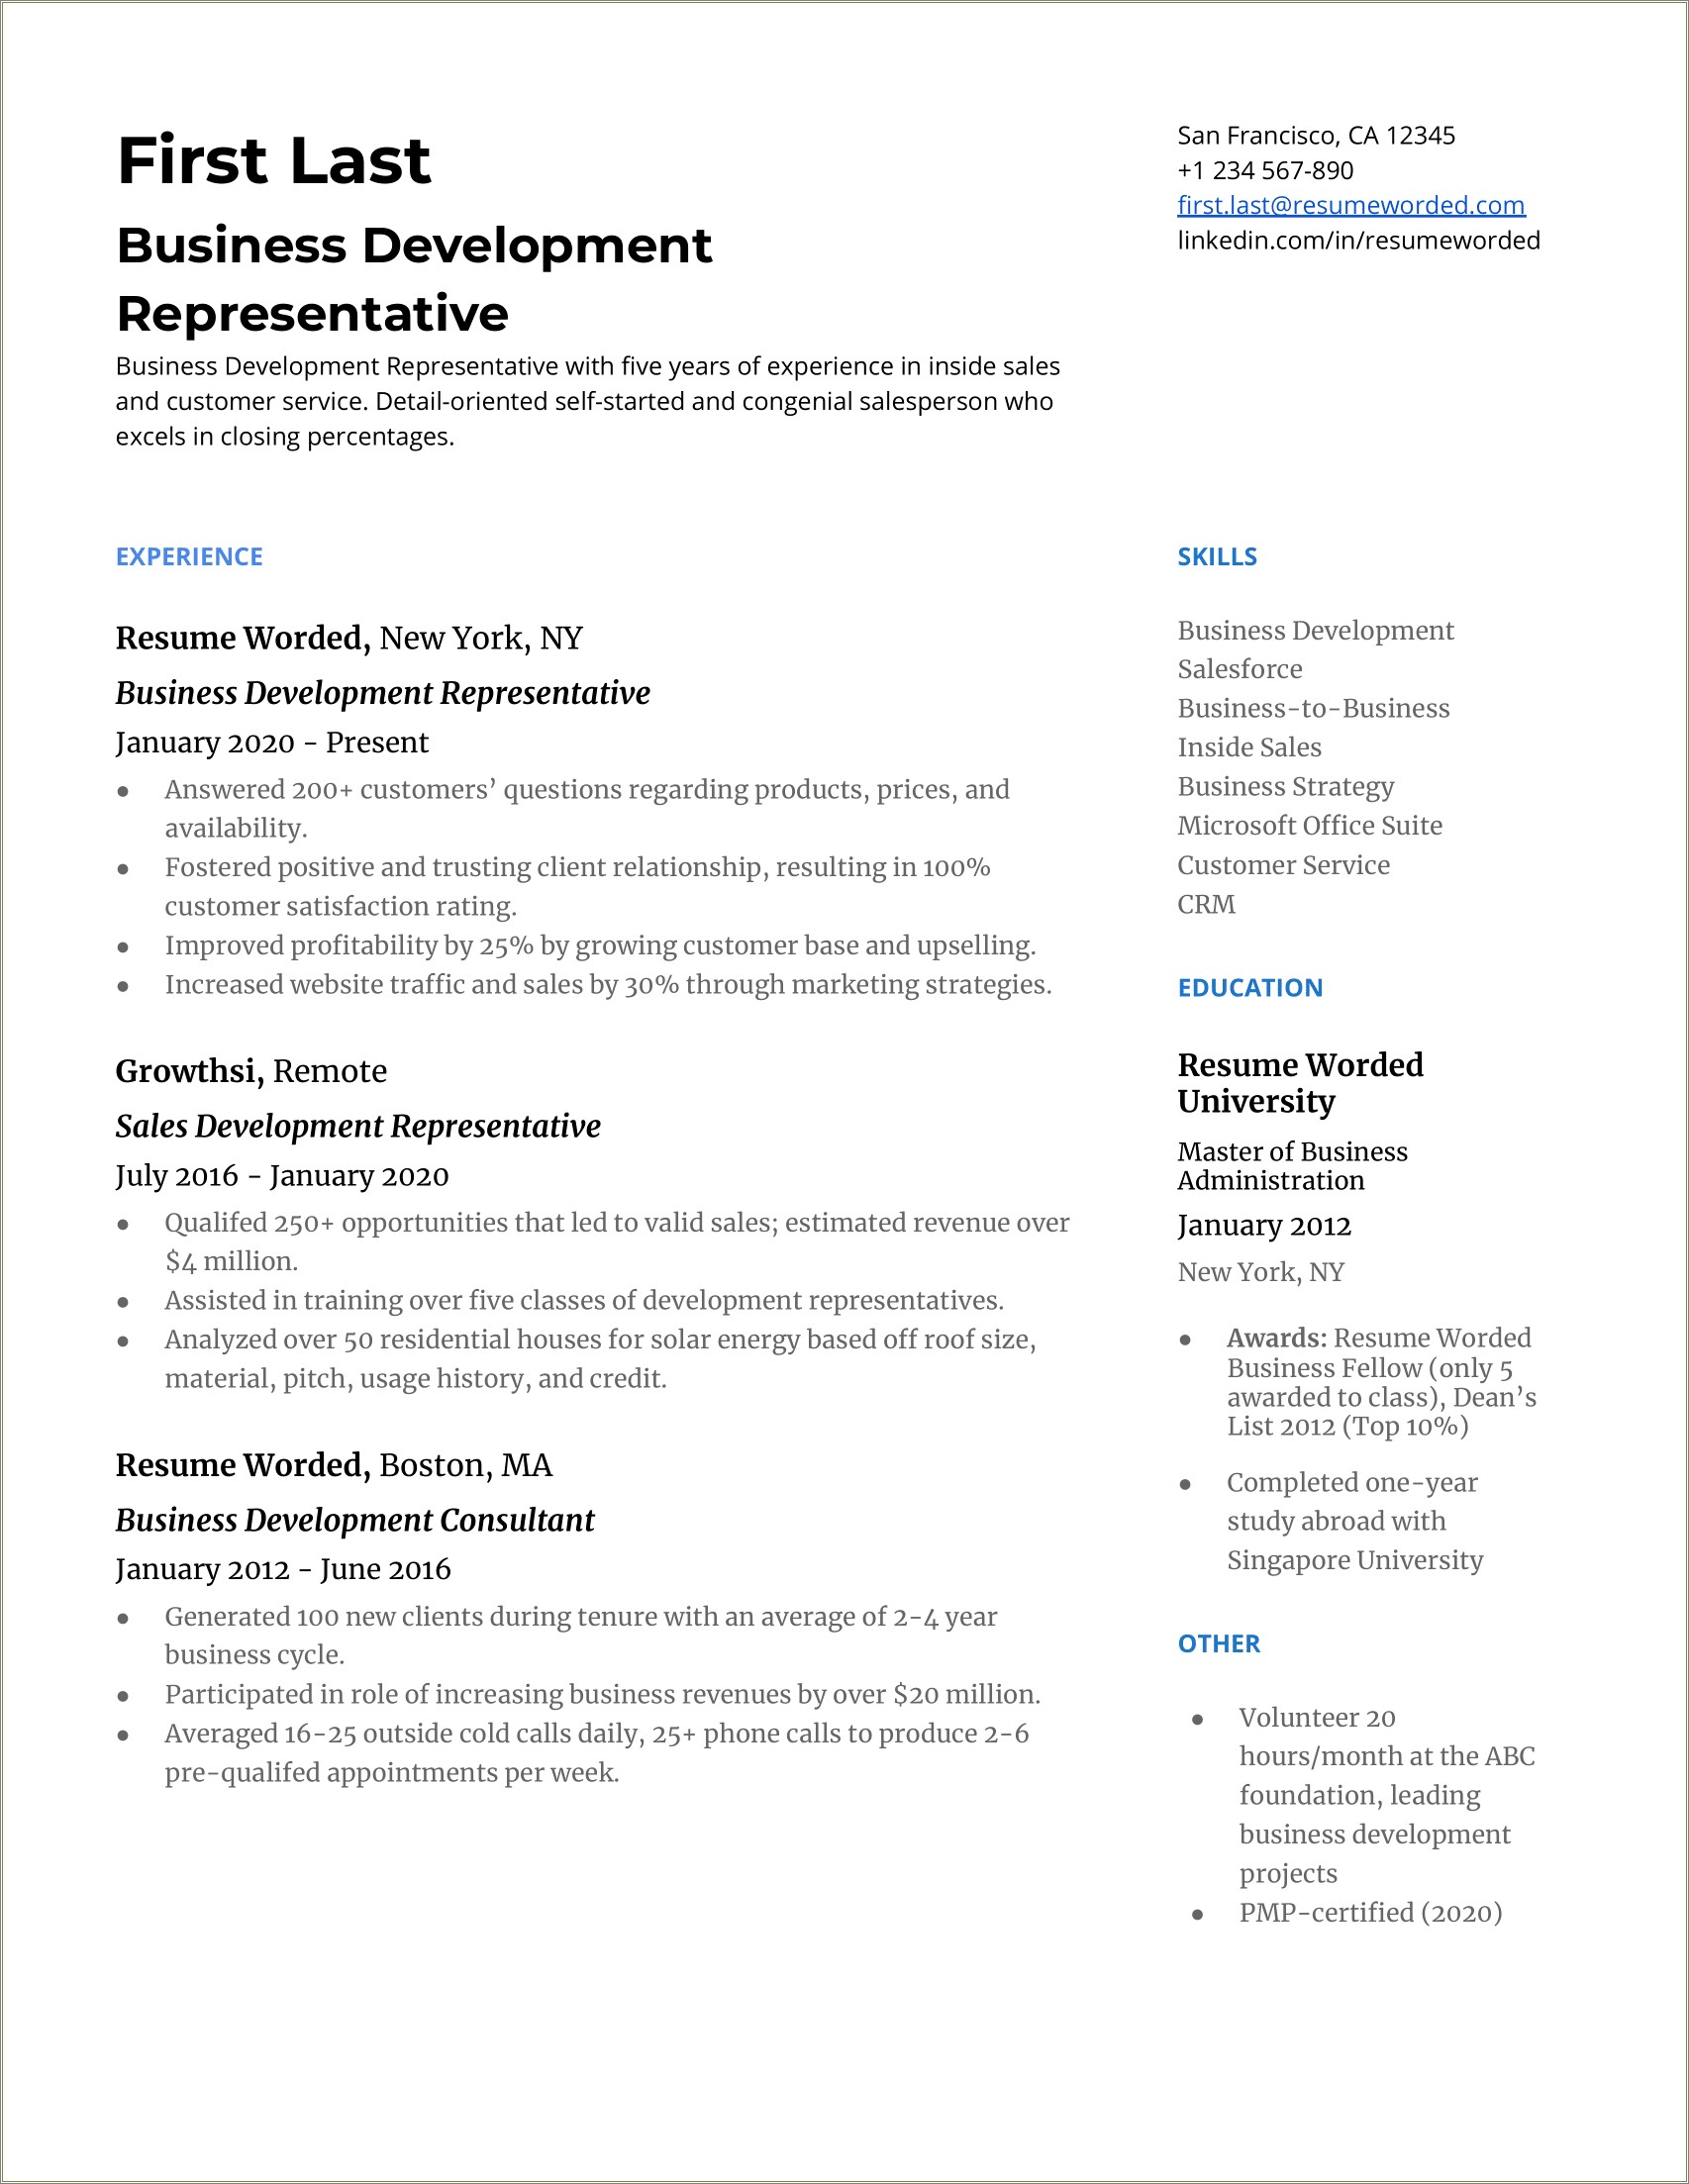 Resume Accomplishments Examples To Demonstrate Your Value